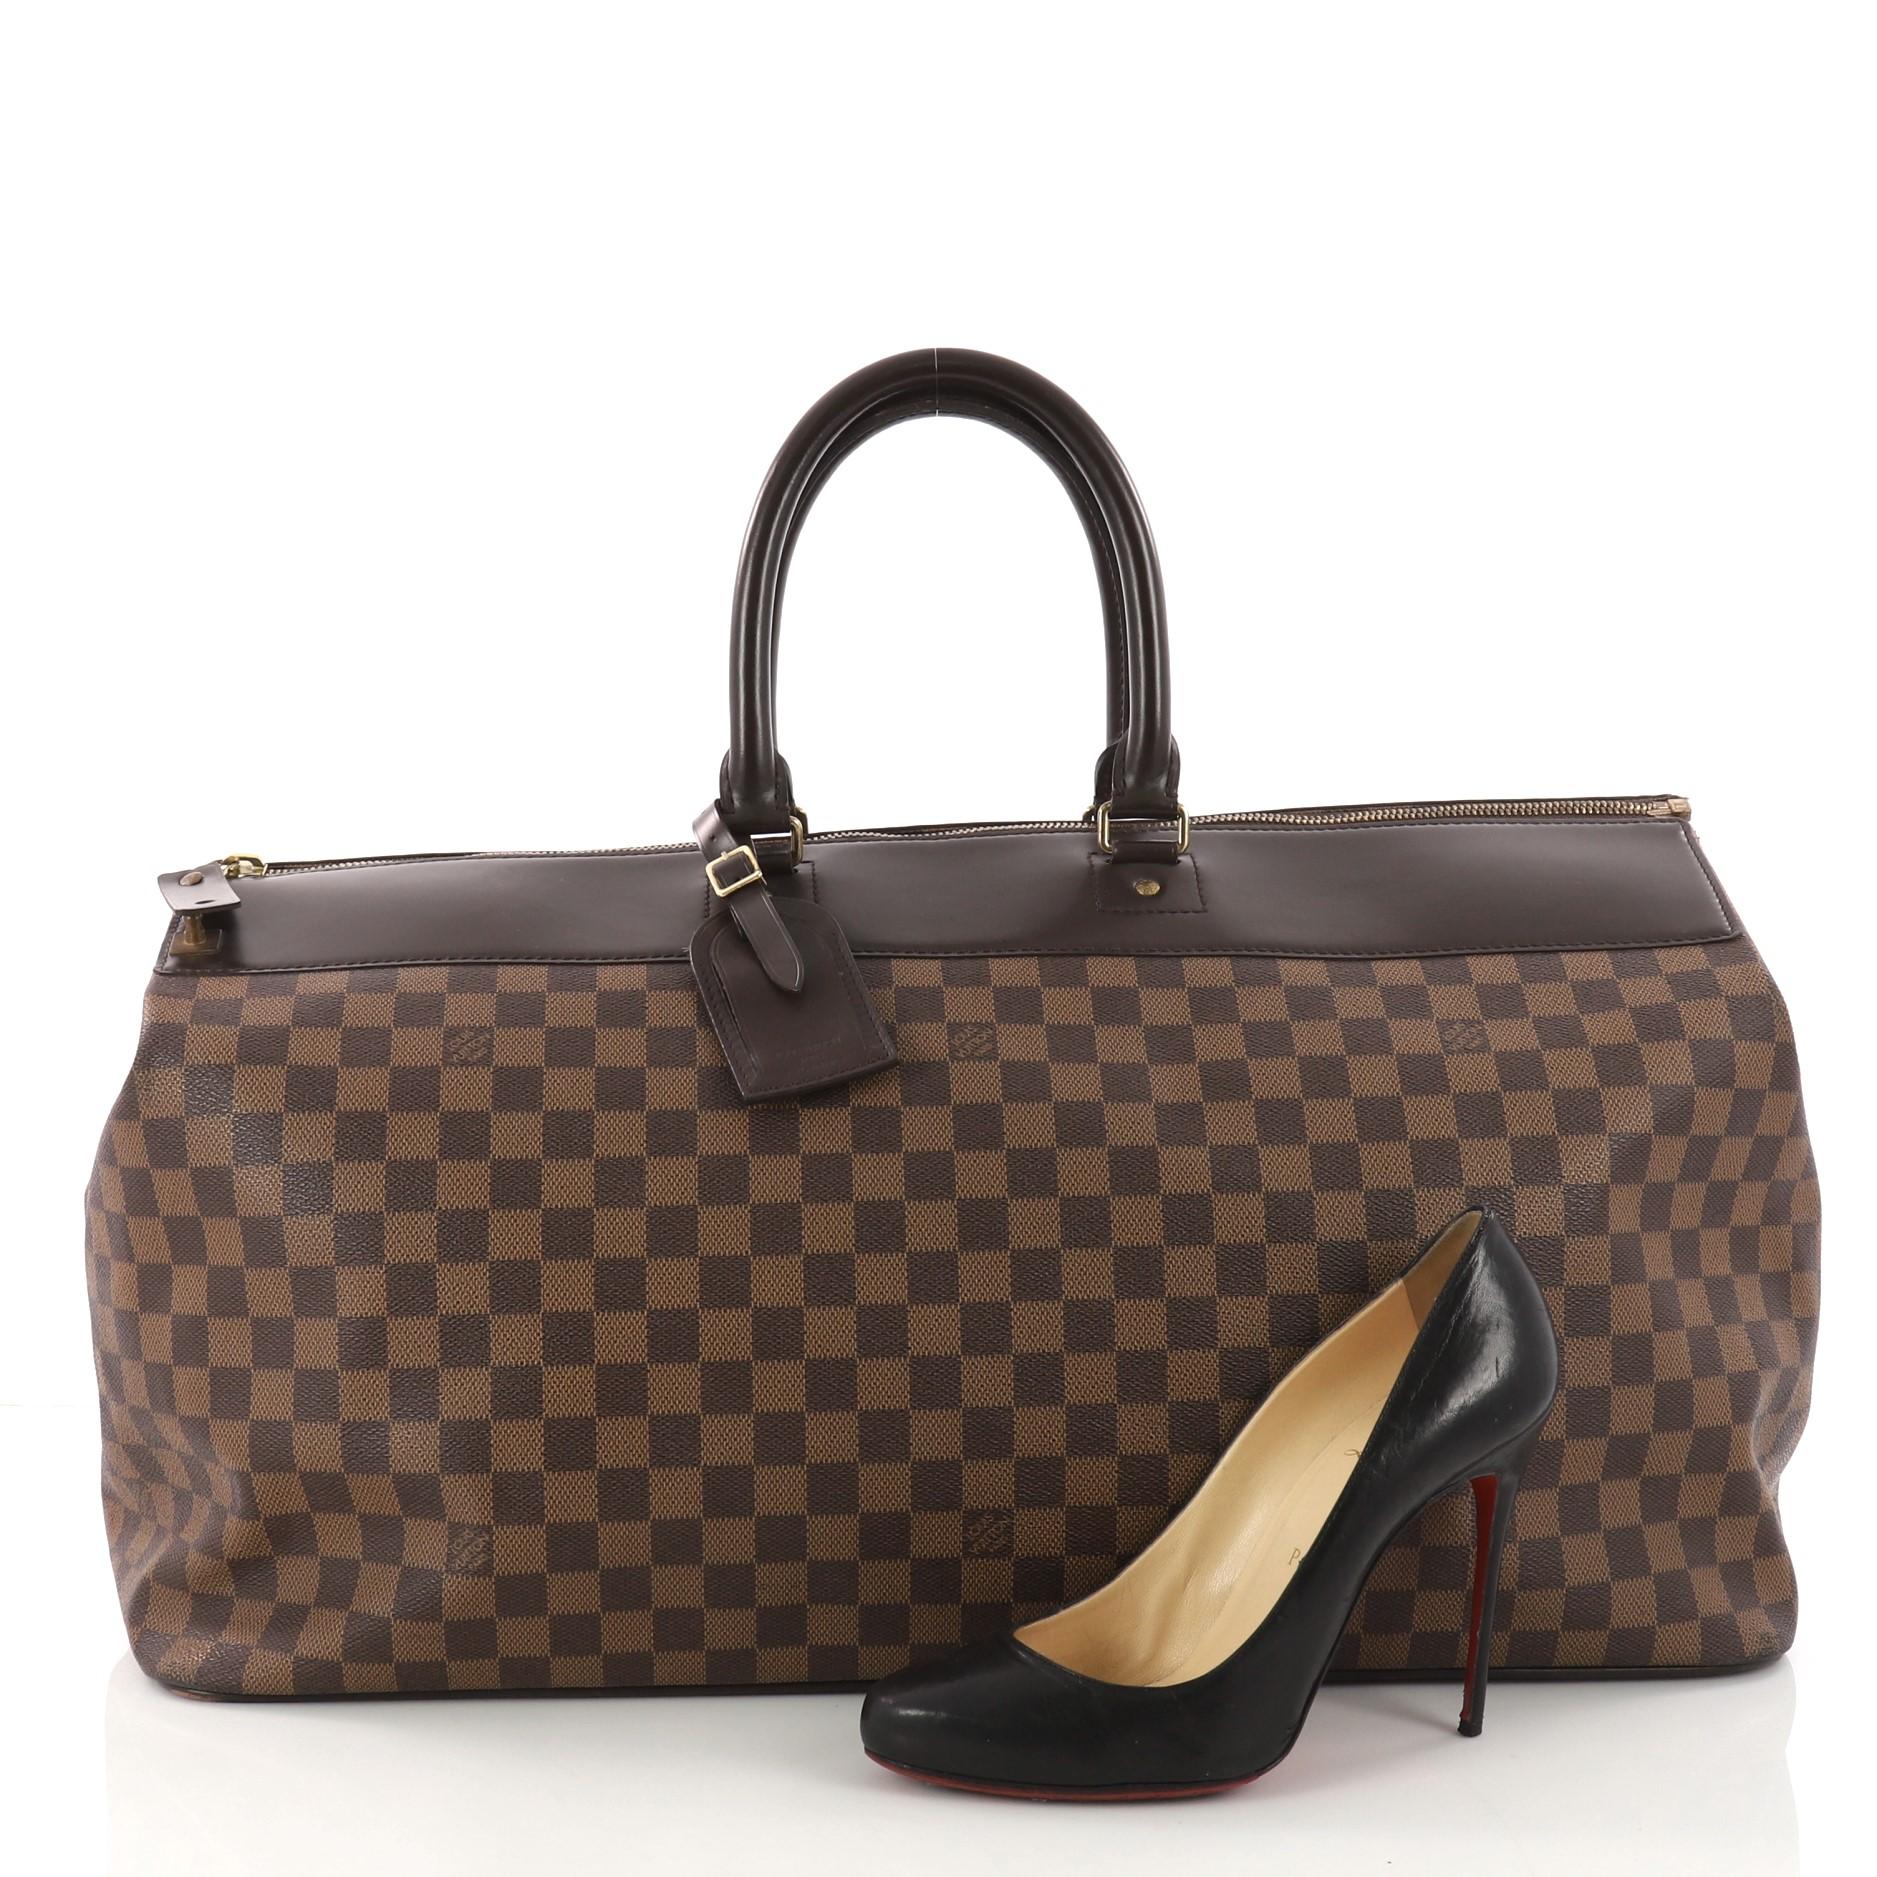 This authentic Louis Vuitton Greenwich Travel Bag Damier GM is the perfect travel companion that combines style and functionality. Constructed in classic damier ebene coated canvas, this structured tote features dual-rolled leather handles, dark